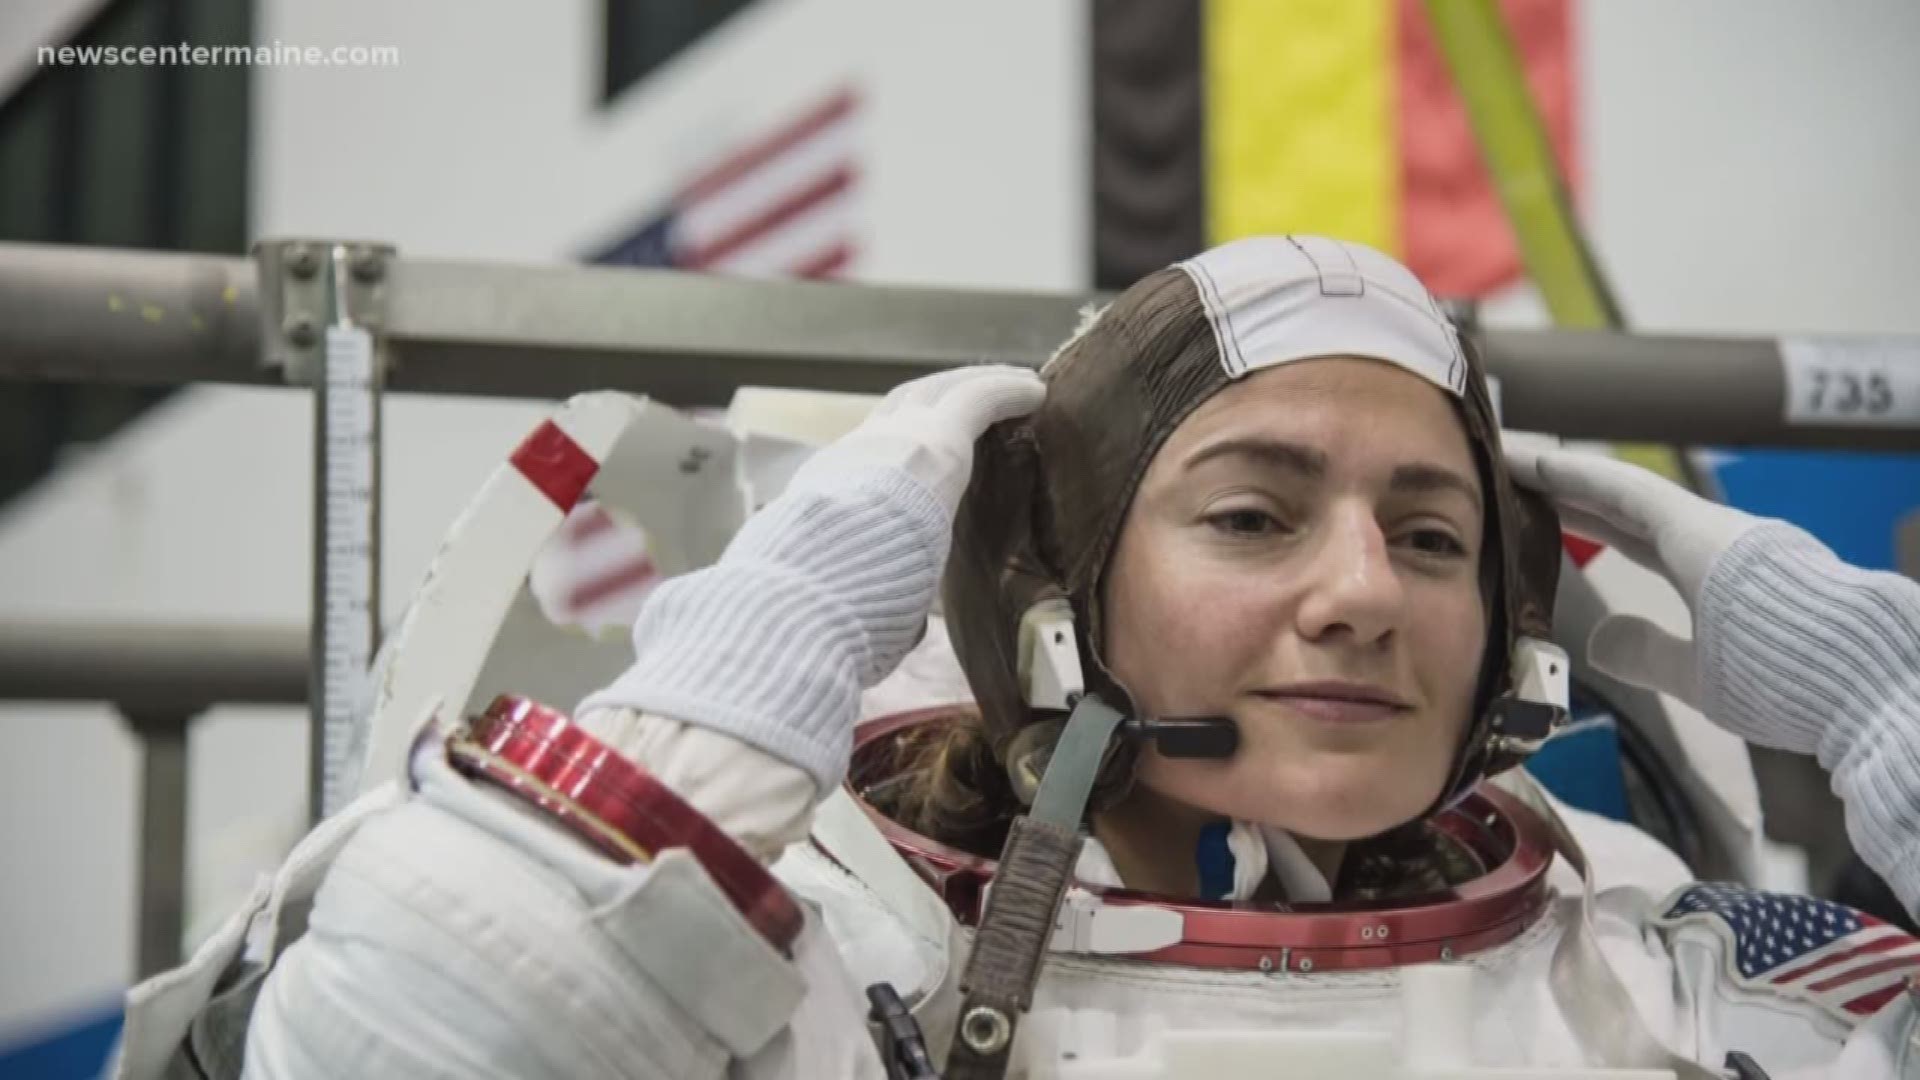 Maine astronaut Jessica Meir will fly to the International Space Station in September and is expected to return in the spring of 2020. Meir is from Caribou